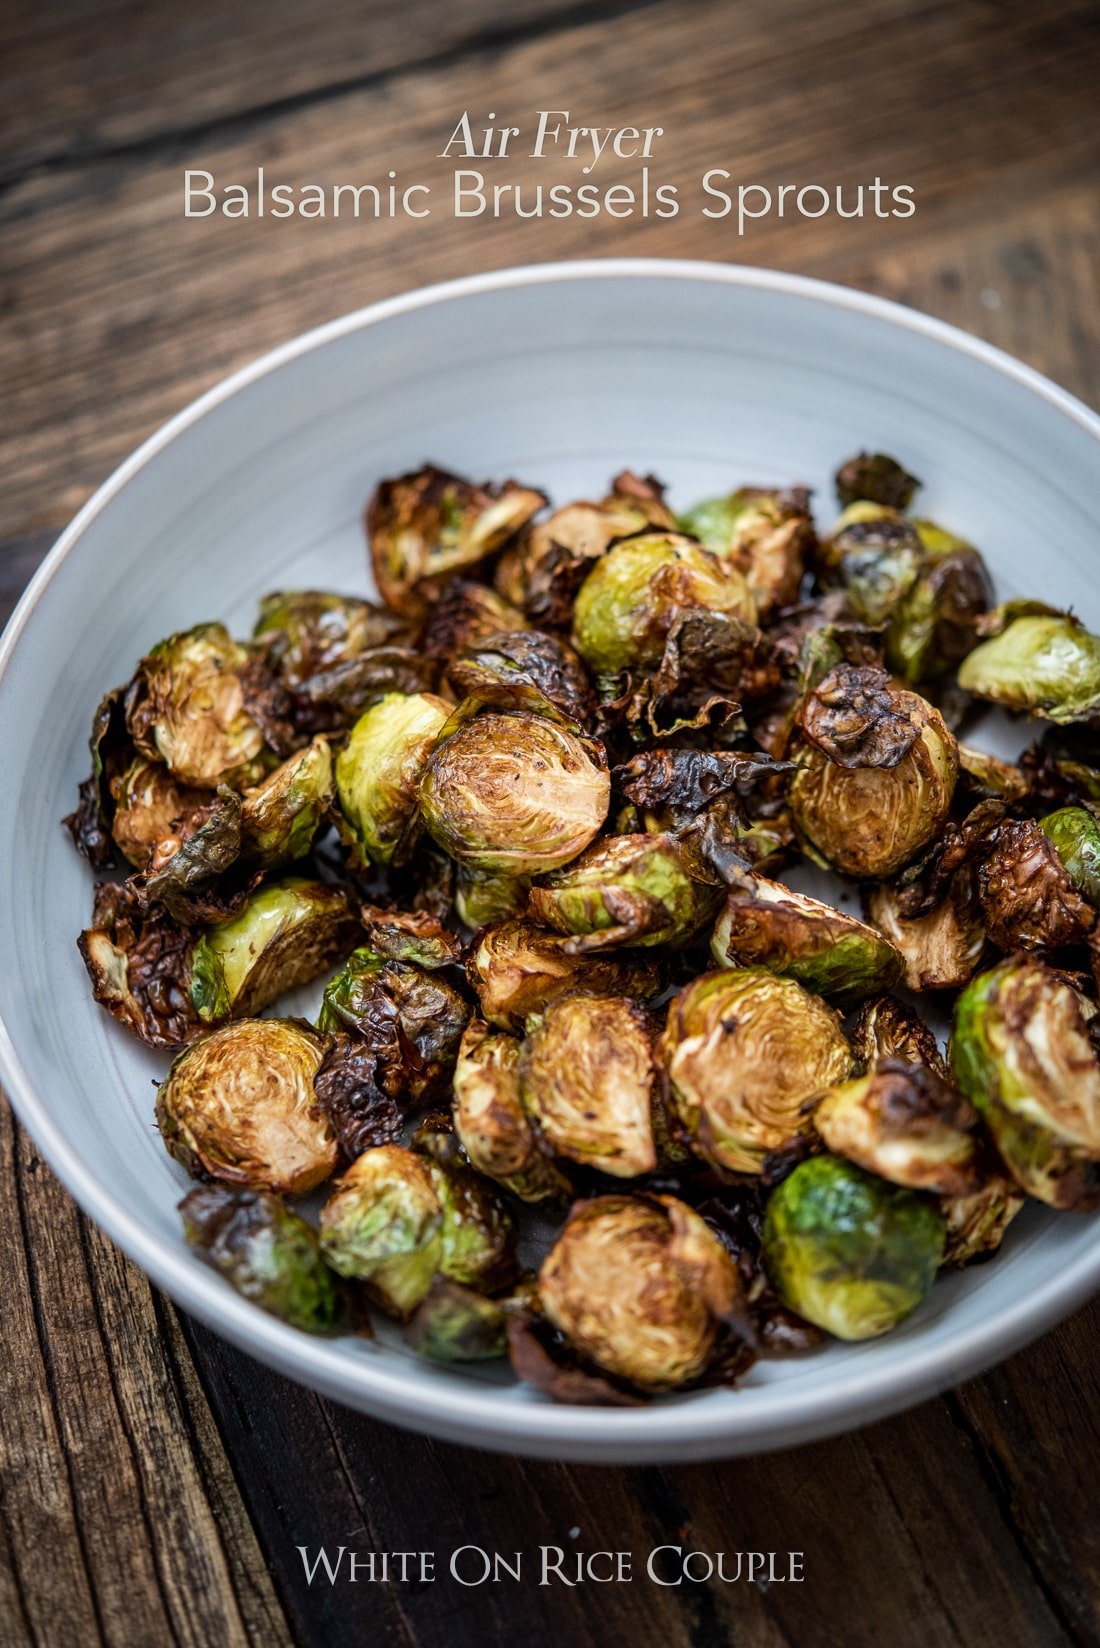 https://whiteonricecouple.com/recipe/images/Air-Fryer-Roasted-Balsamic-Roasted-Brussels-Sprouts-2.jpg